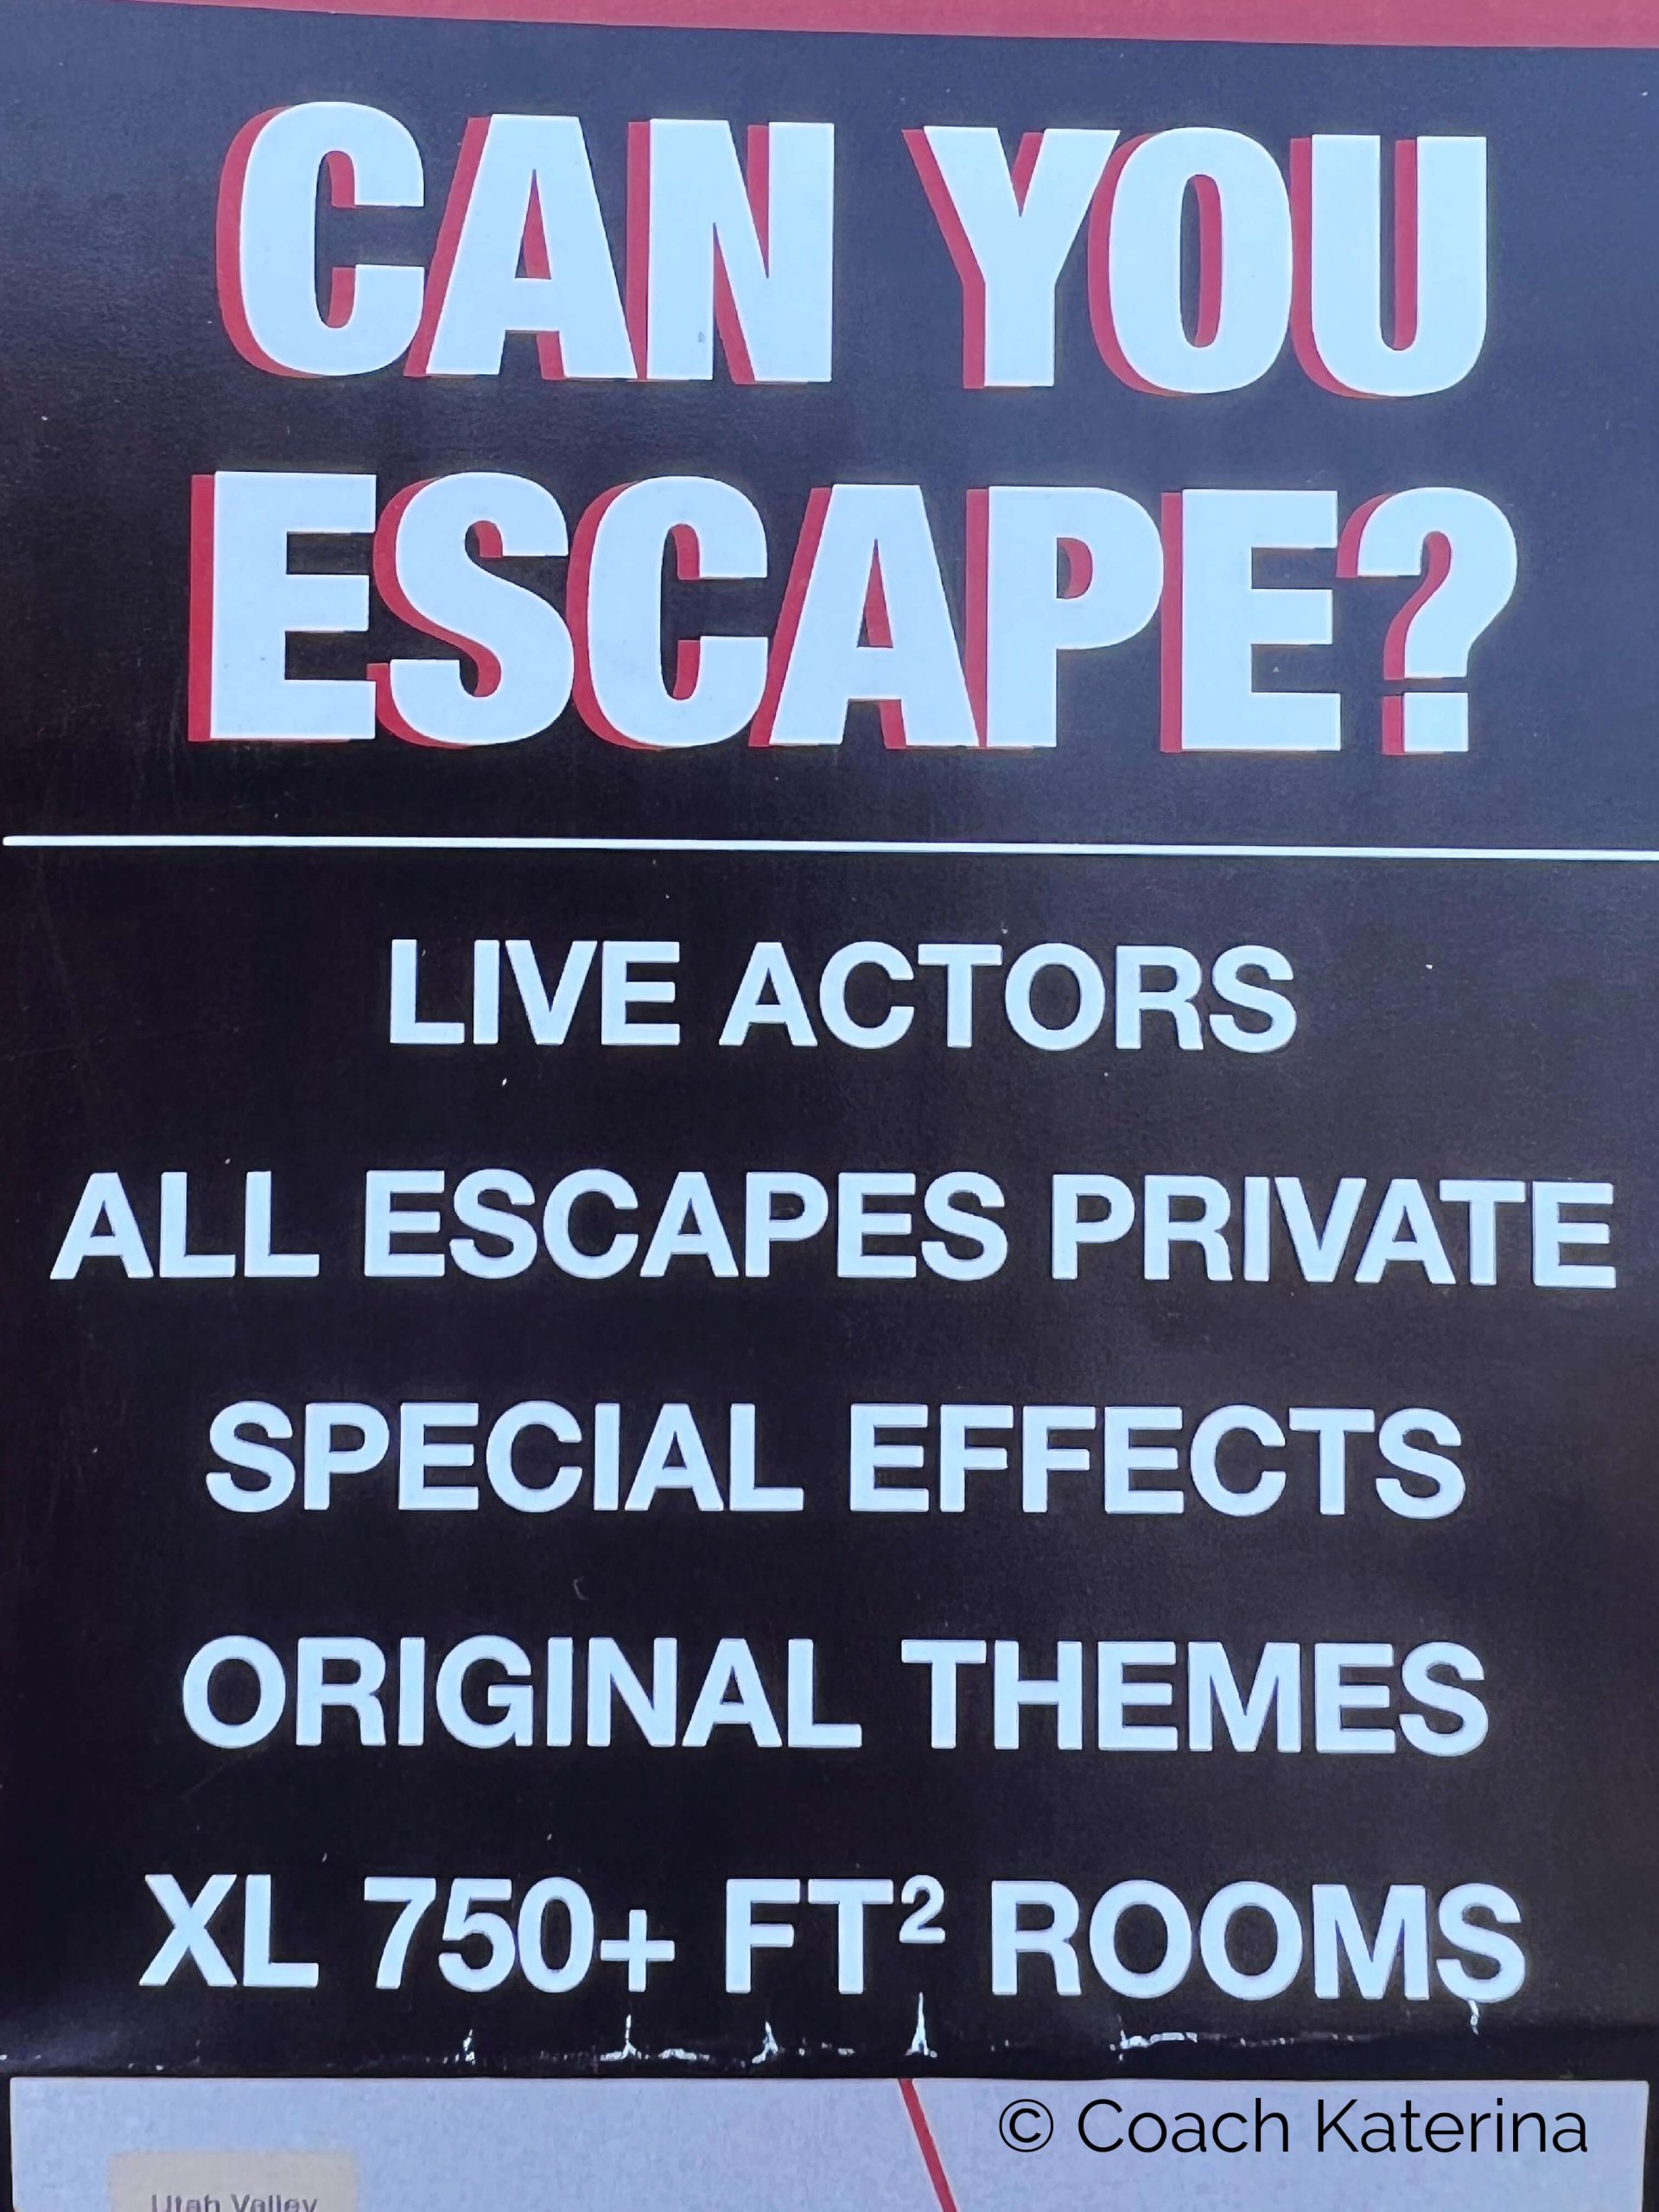 Red Giant Escape Room in Orem Utah Poster. We love that they have live actors and original themes to choose from!